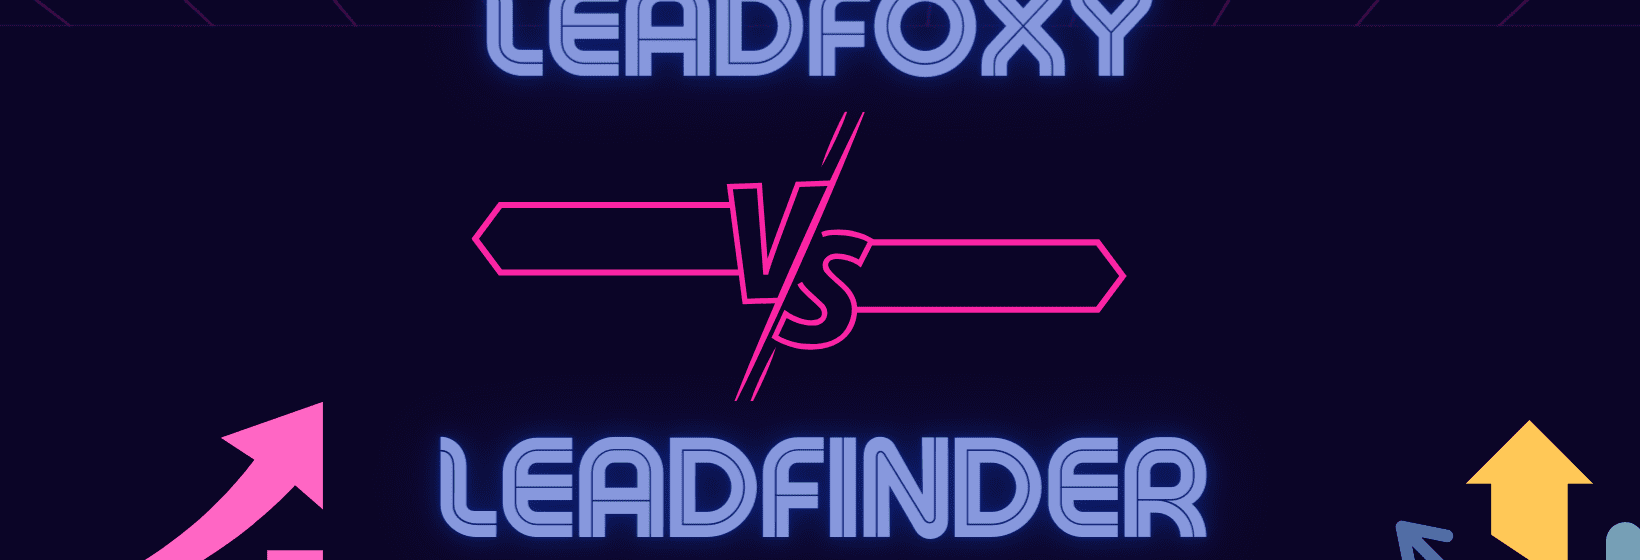 Leadfoxy vs. Leadfinder: Unveiling the Best Lead Generation Software for Your Business